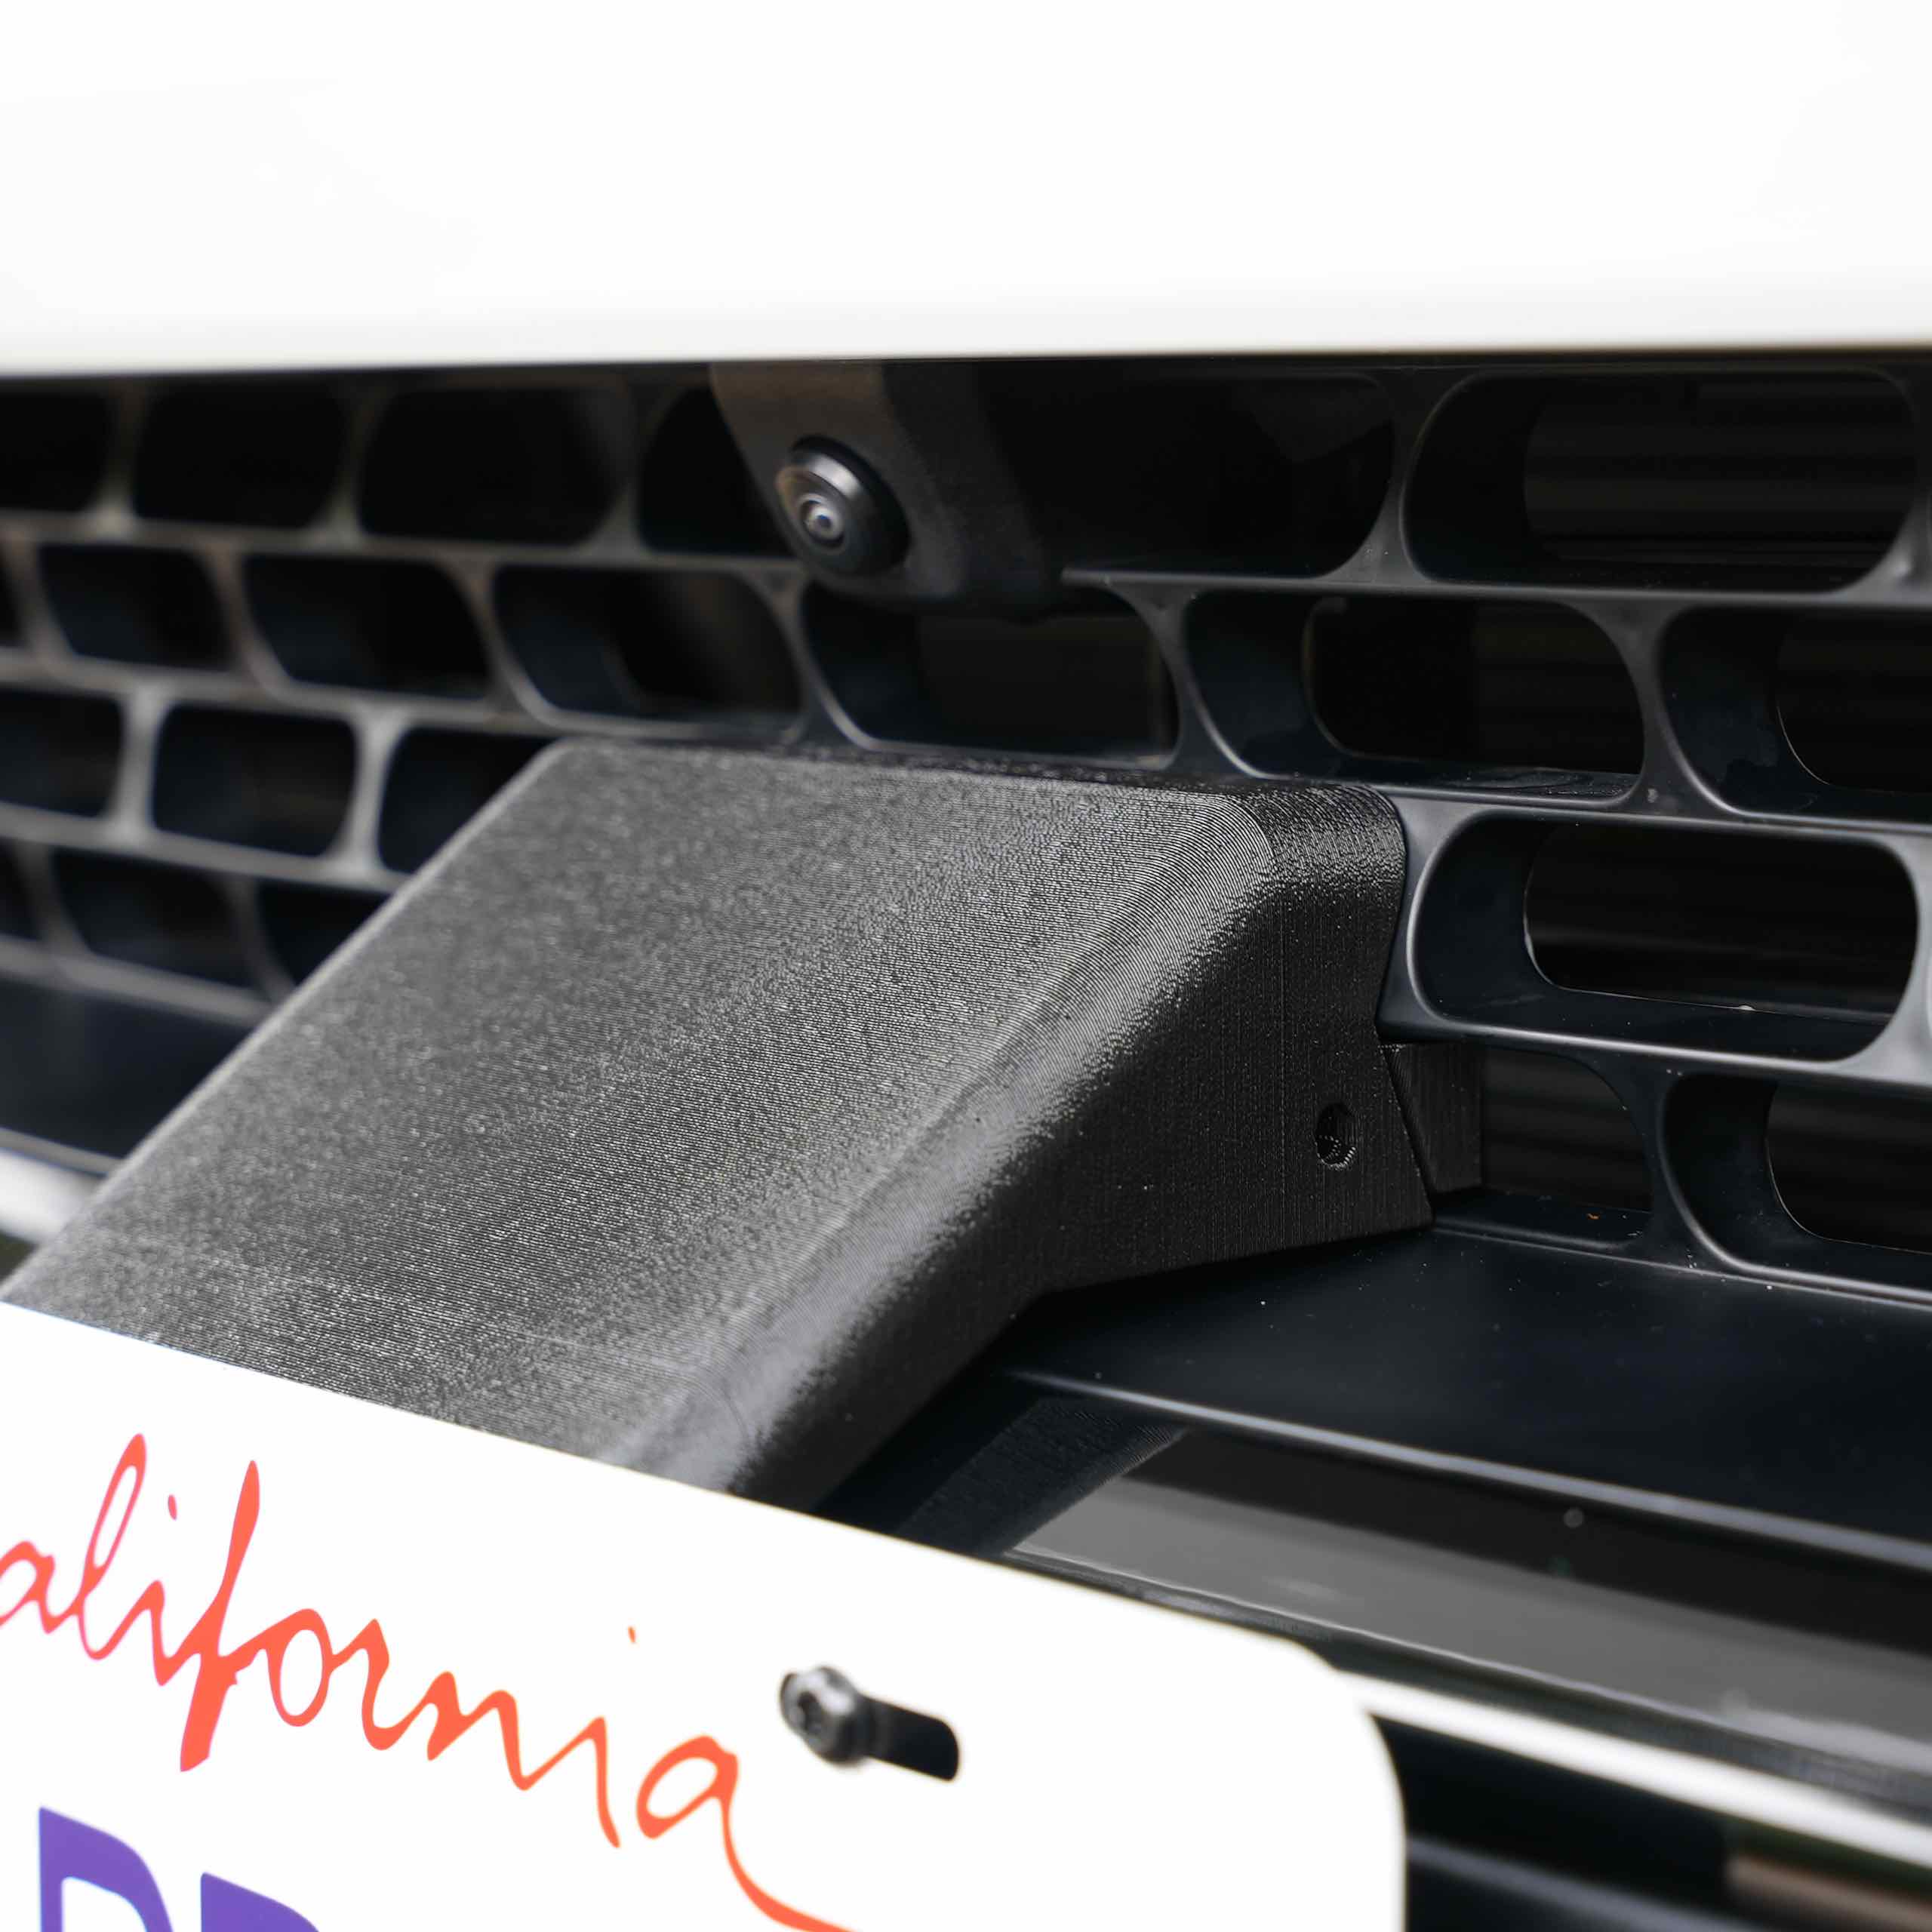 SnapPlate License Plate Mount for Rivian R1T & R1S (version 2)